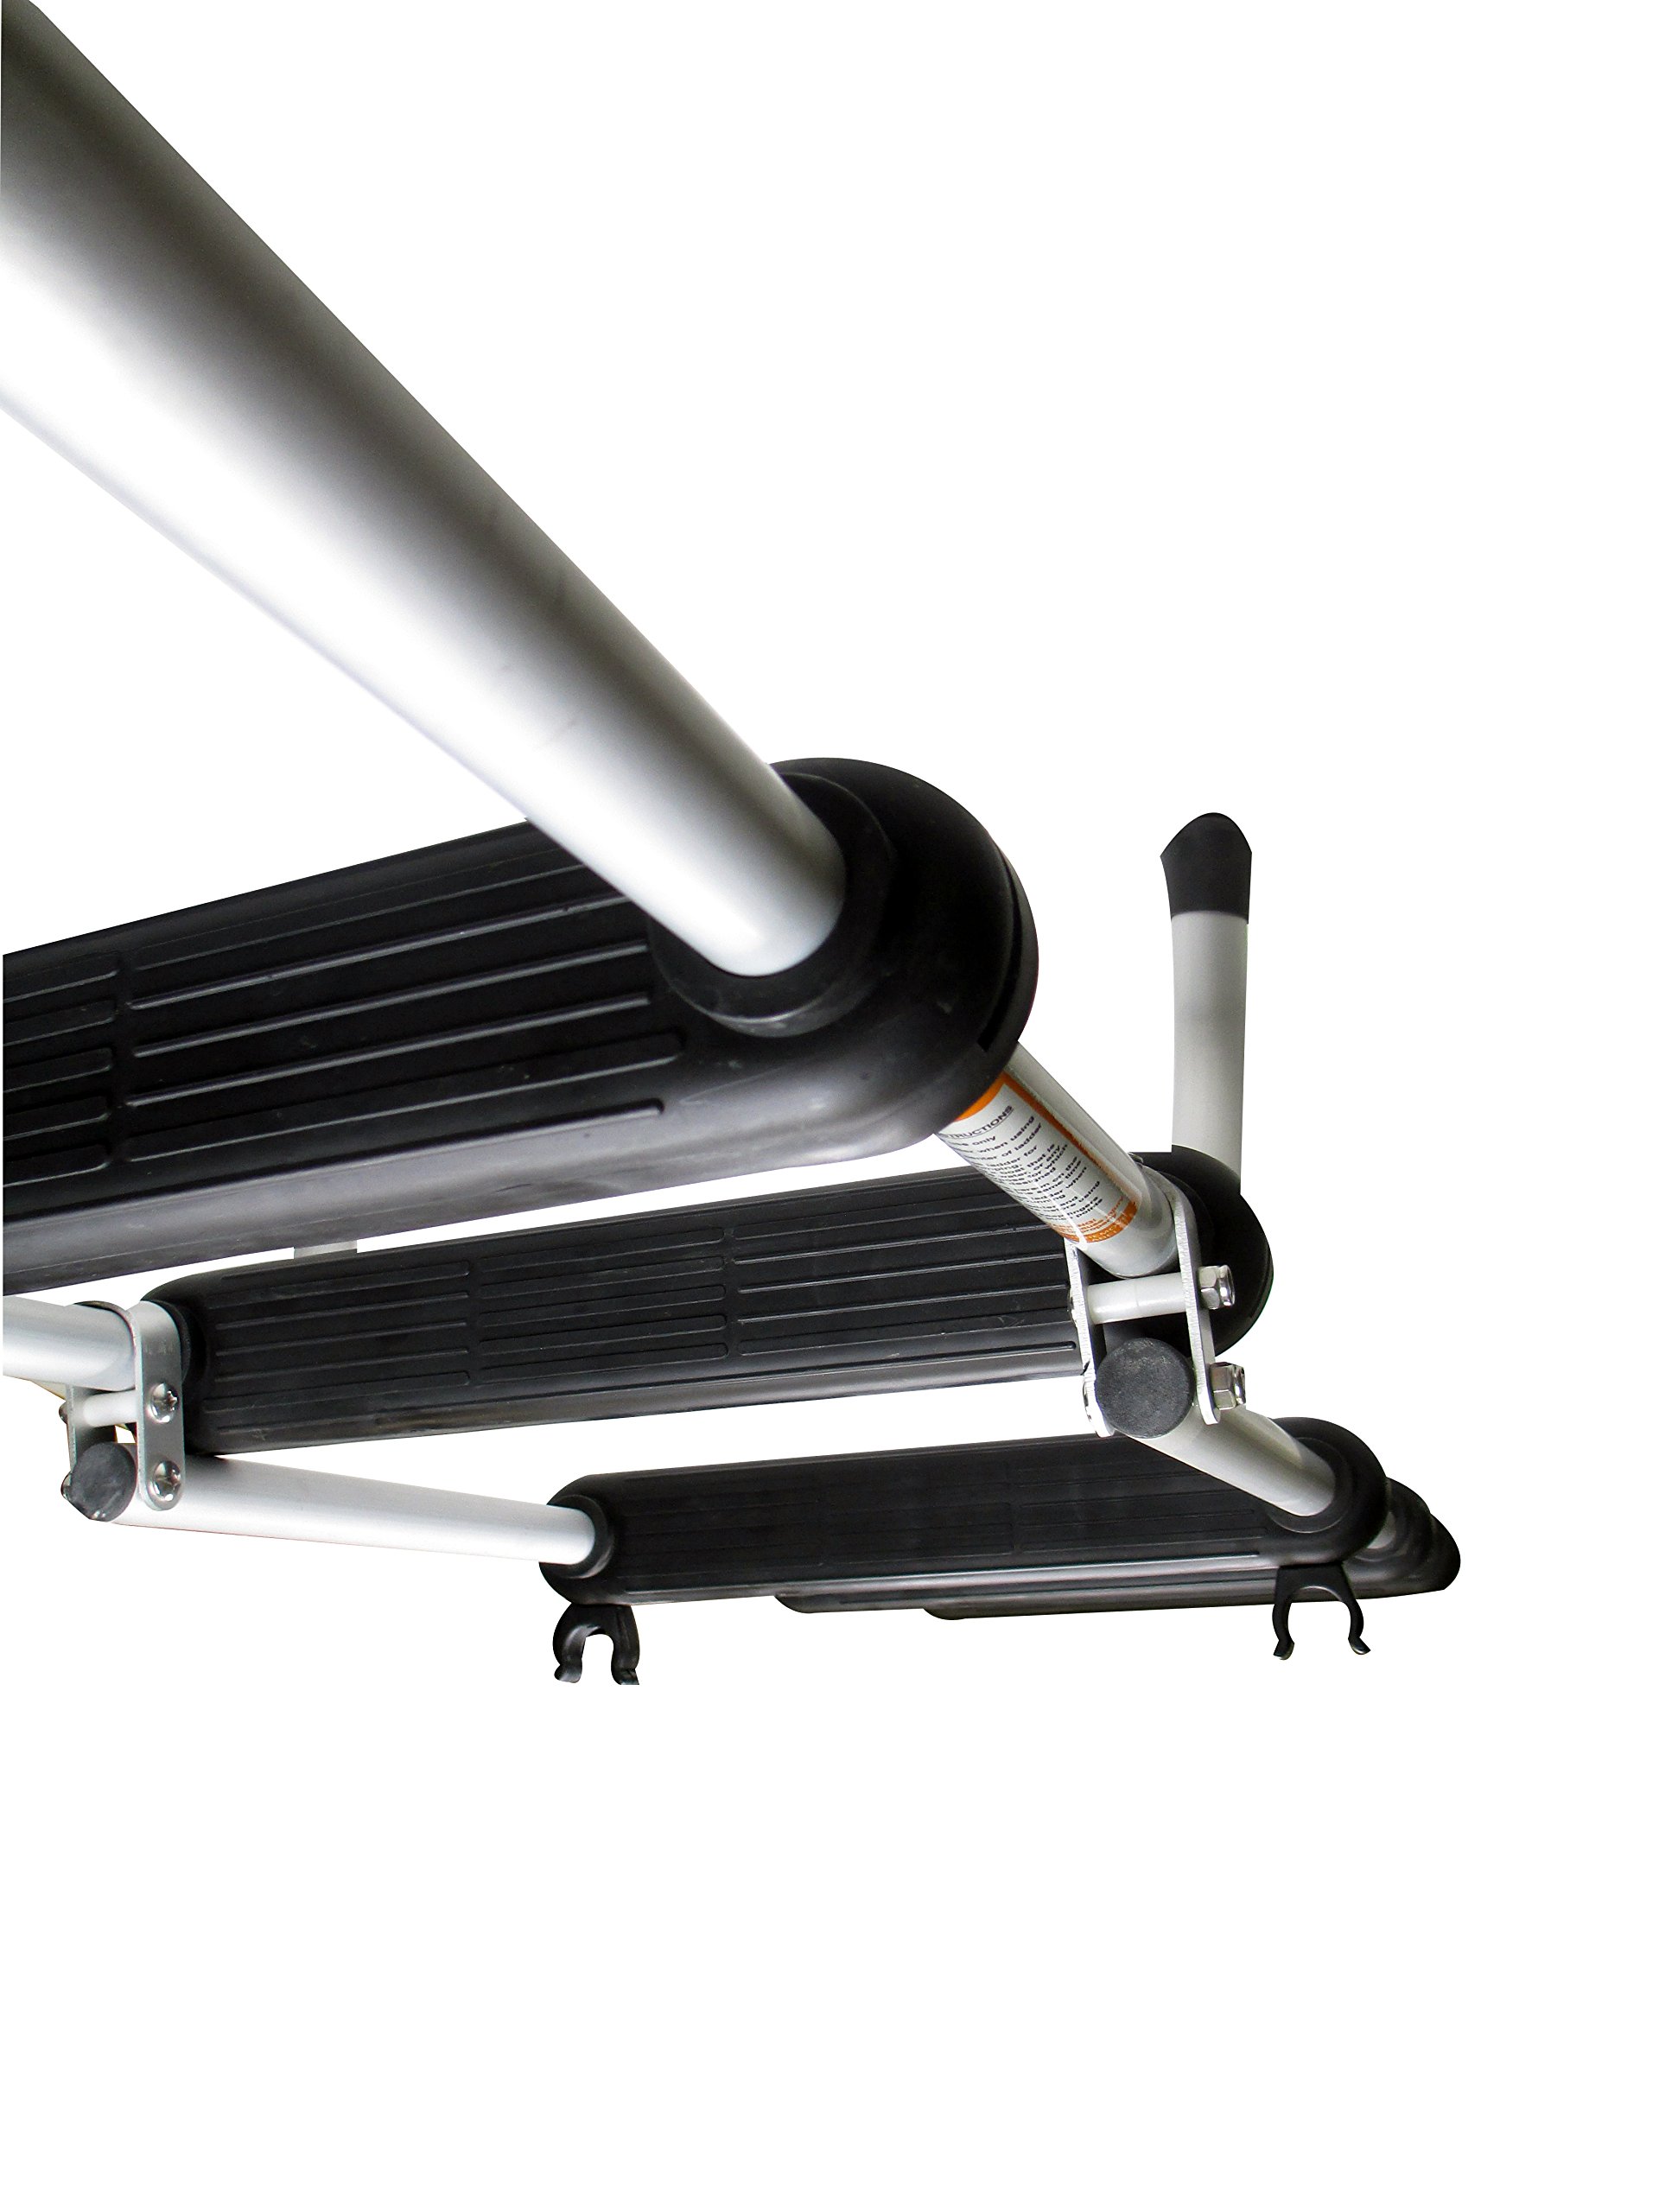 Pactrade Marine Pontoon Boat Removable Folding Ladder 5 Step Anodized Aluminum Tubing 300lbs